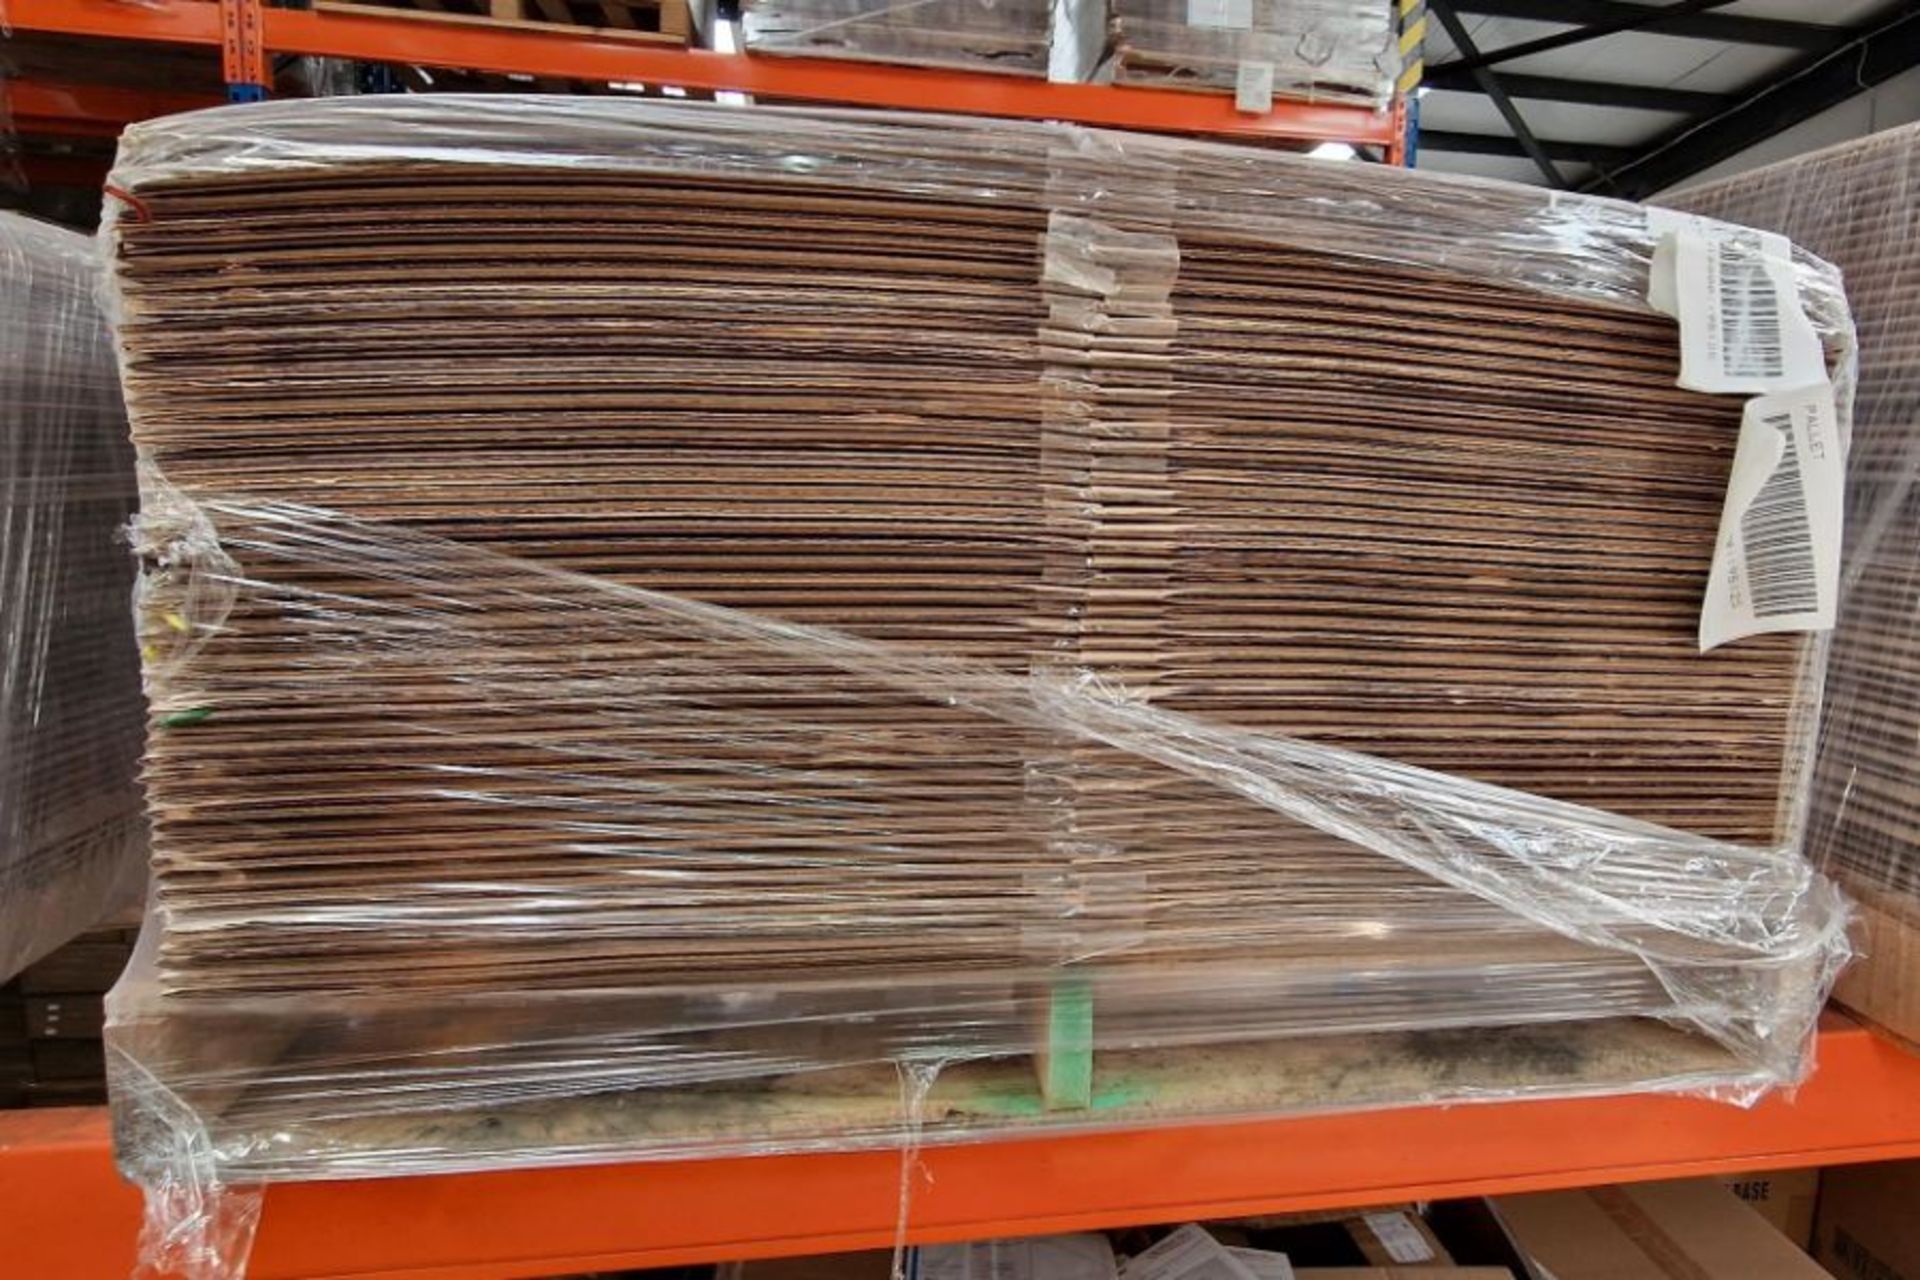 A pallet containing as new under desk chair mats (46 x 60 inch) (CM21142) - Image 3 of 3